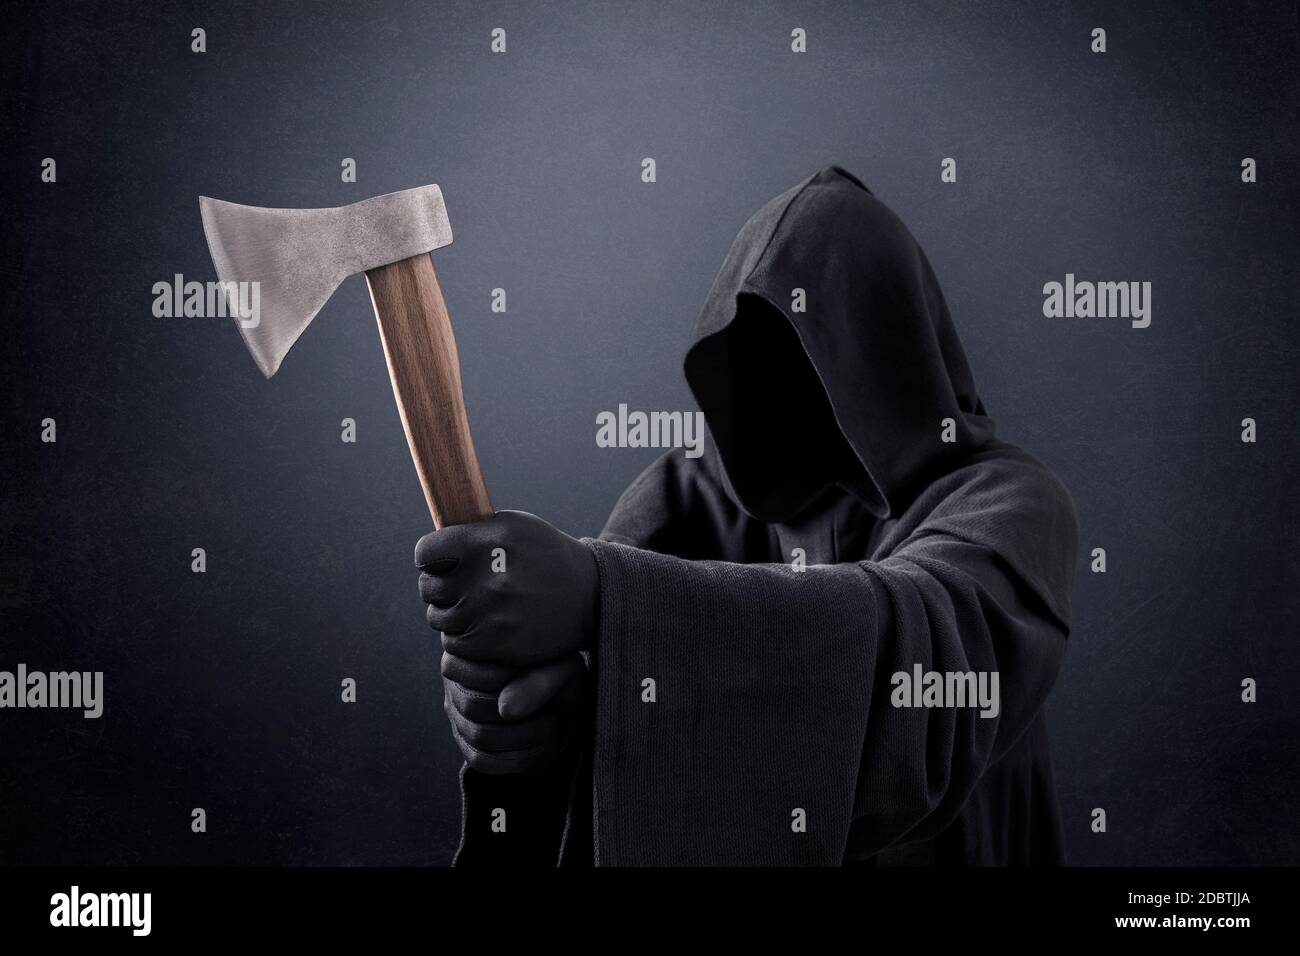 Scary figure in hooded cloak with axe in the dark Stock Photo